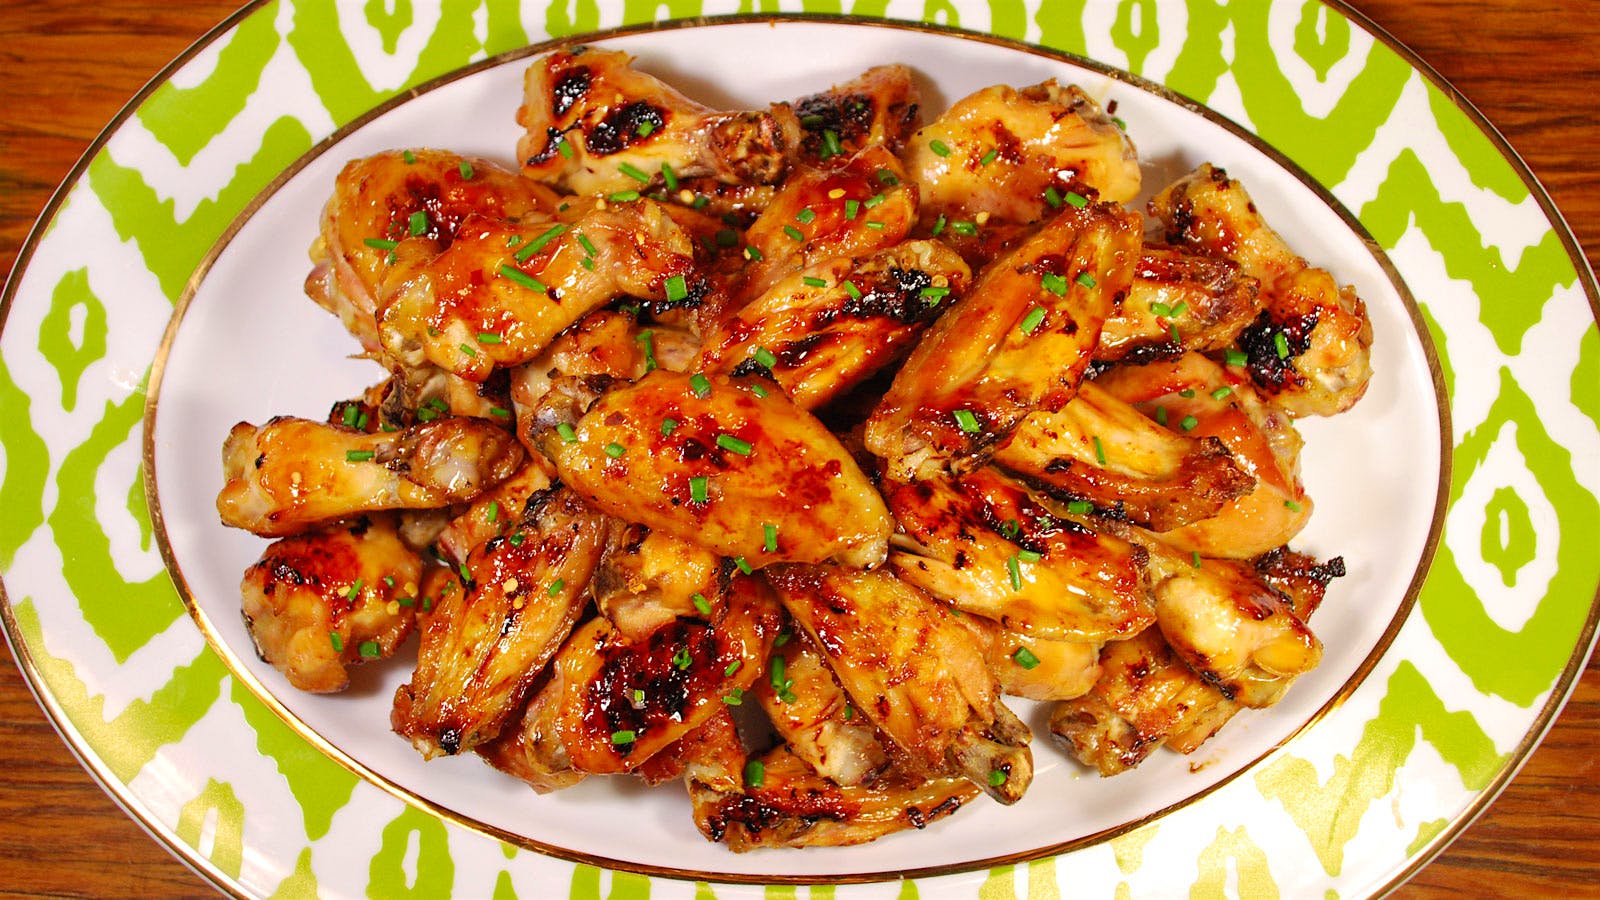 8 & $20: Pineapple-Chile Chicken Wings